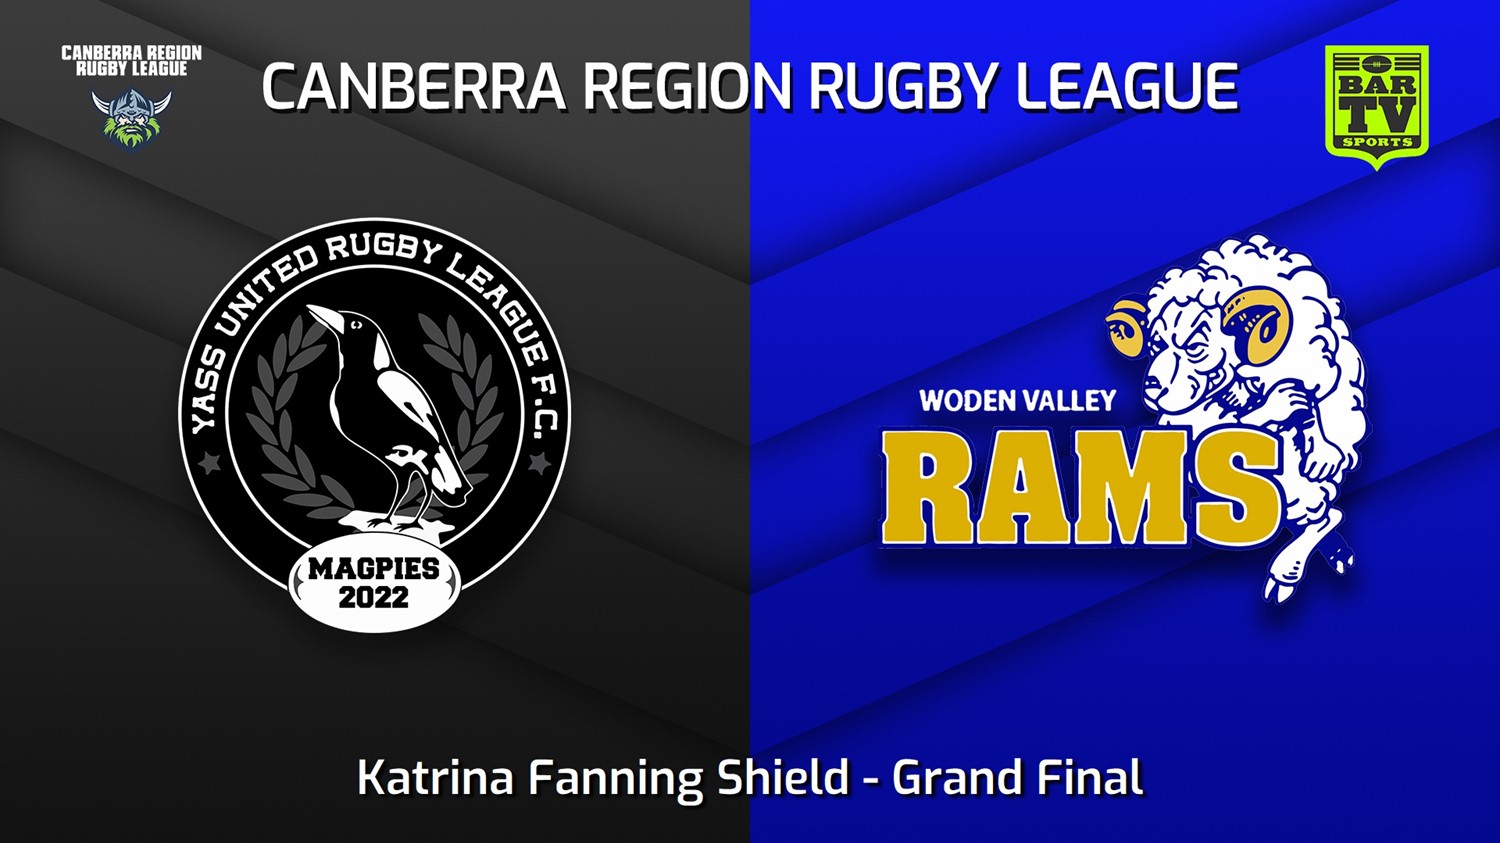 220917-Canberra Grand Final - Katrina Fanning Shield - Yass Magpies v Woden Valley Rams Minigame Slate Image